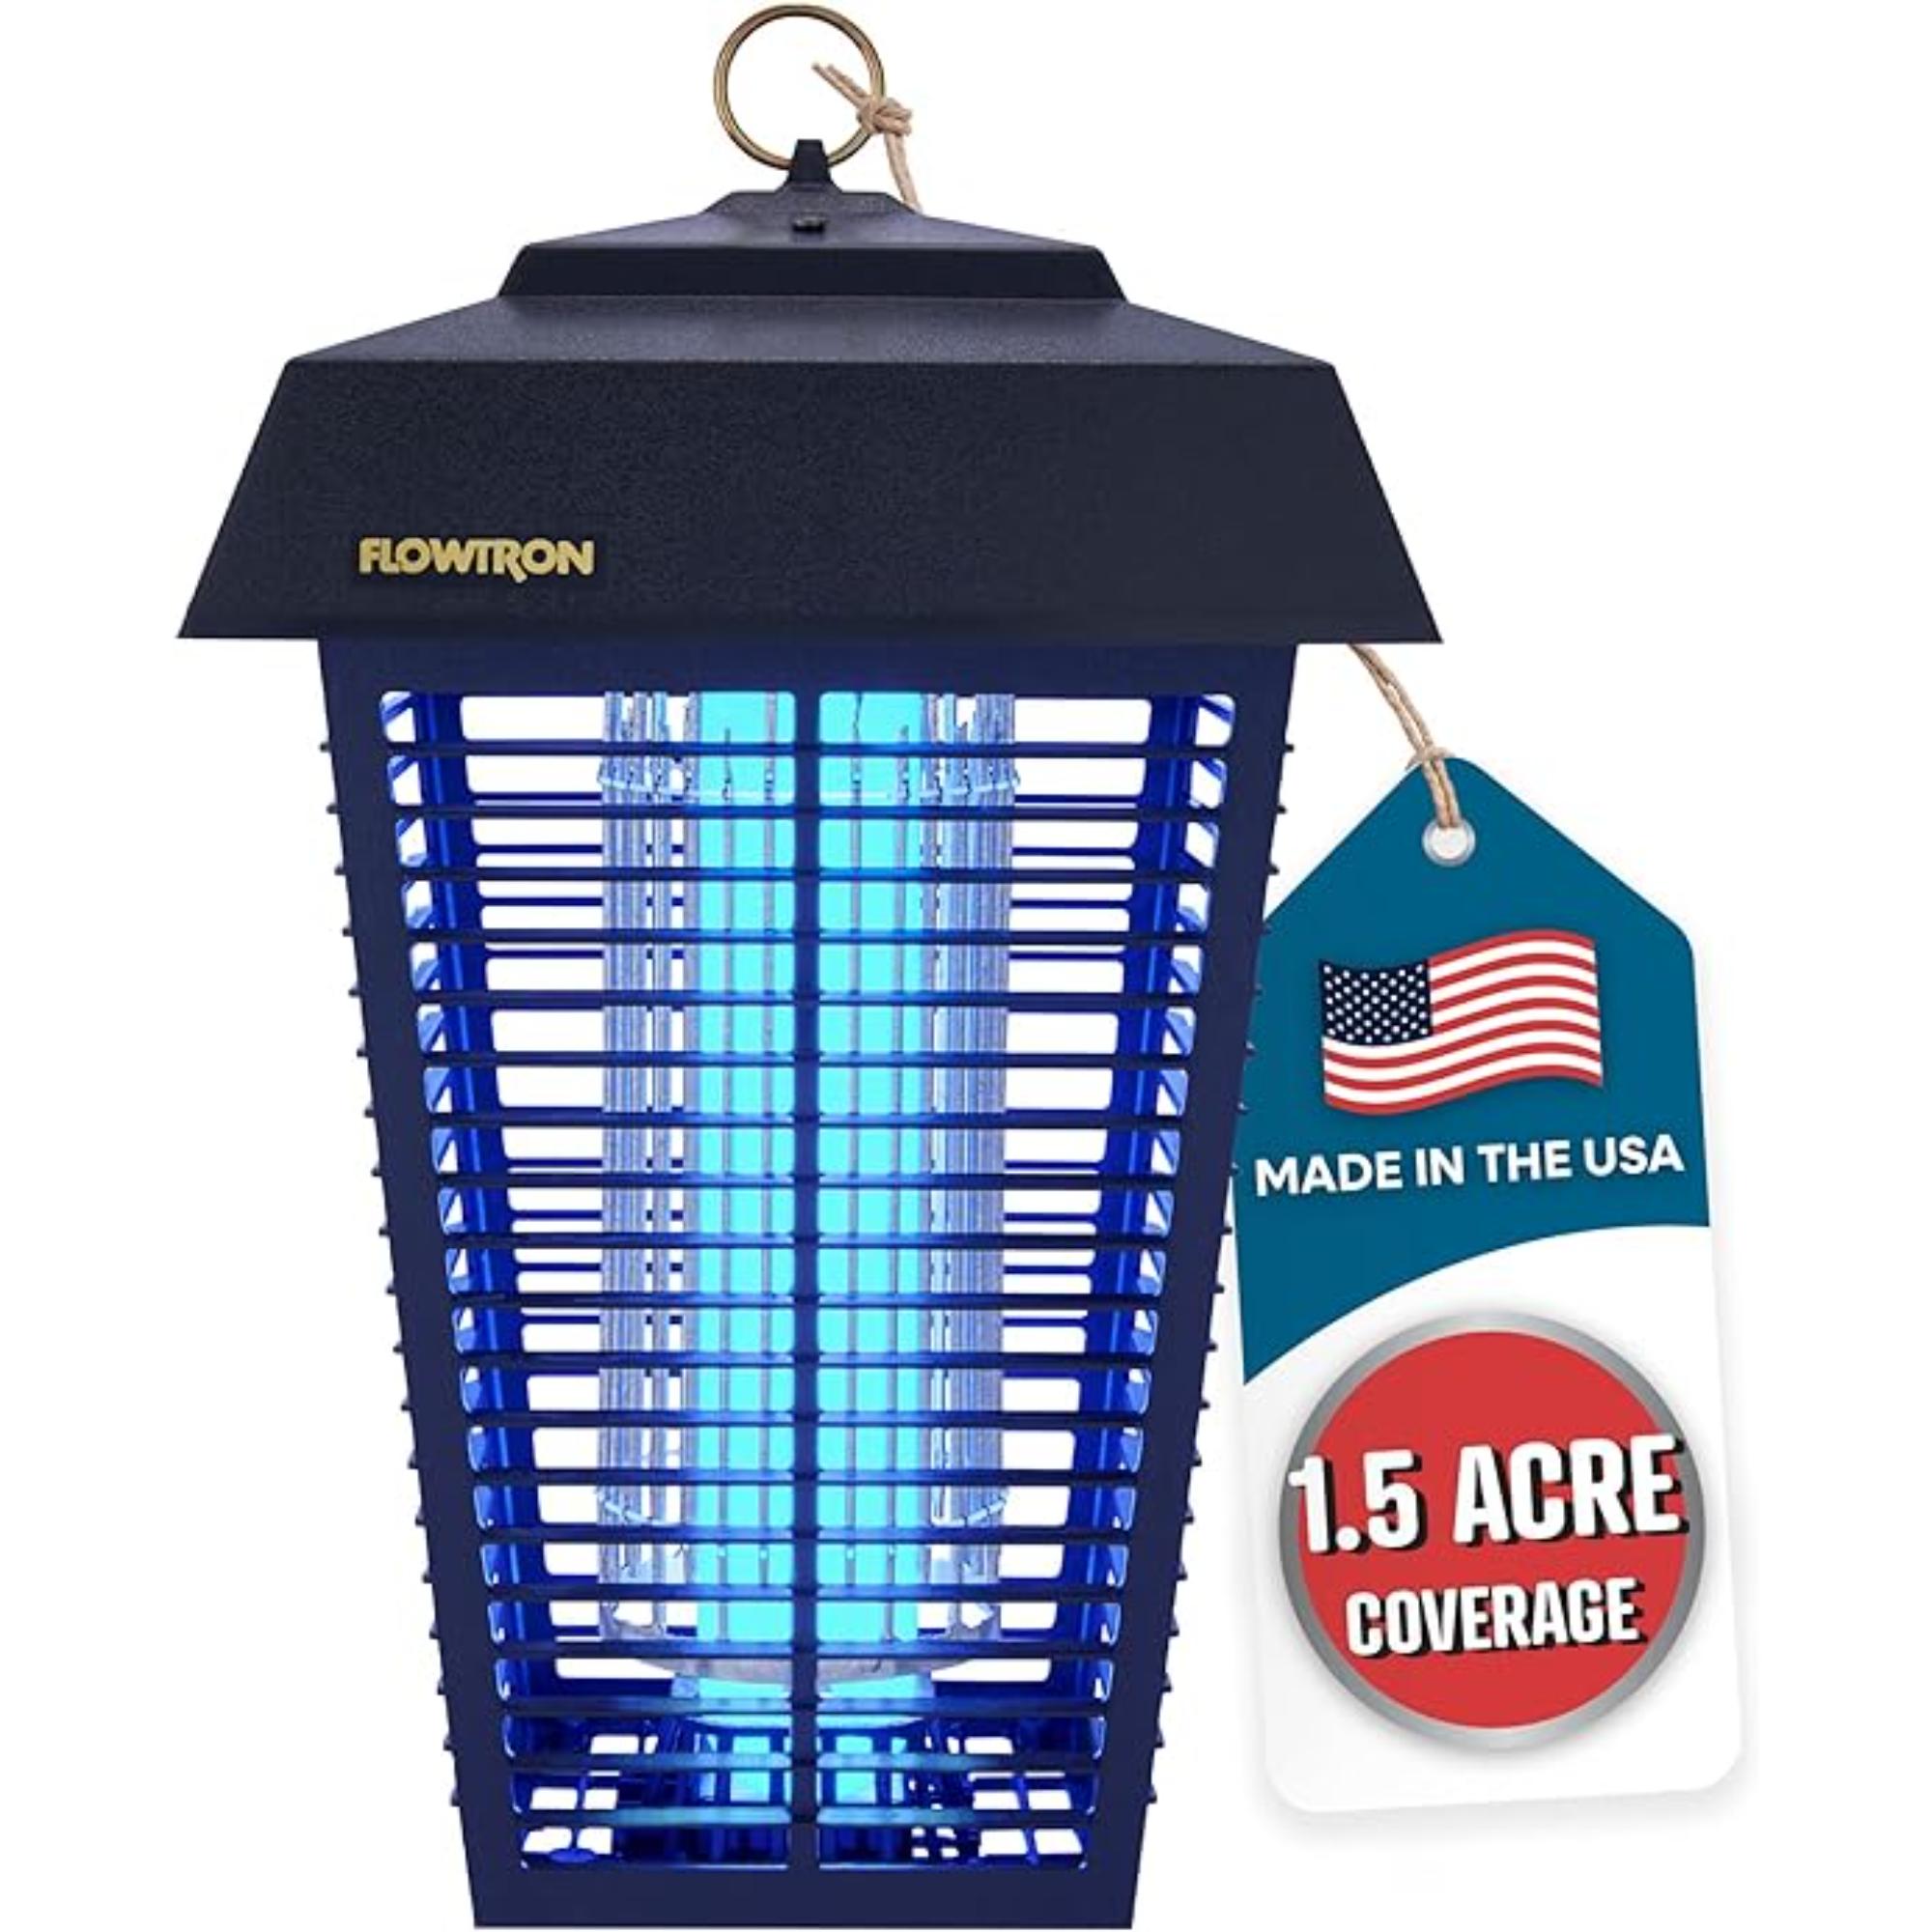 Flowtron Electric Bug Zapper 1.5 Acr Outdoor Insect Control